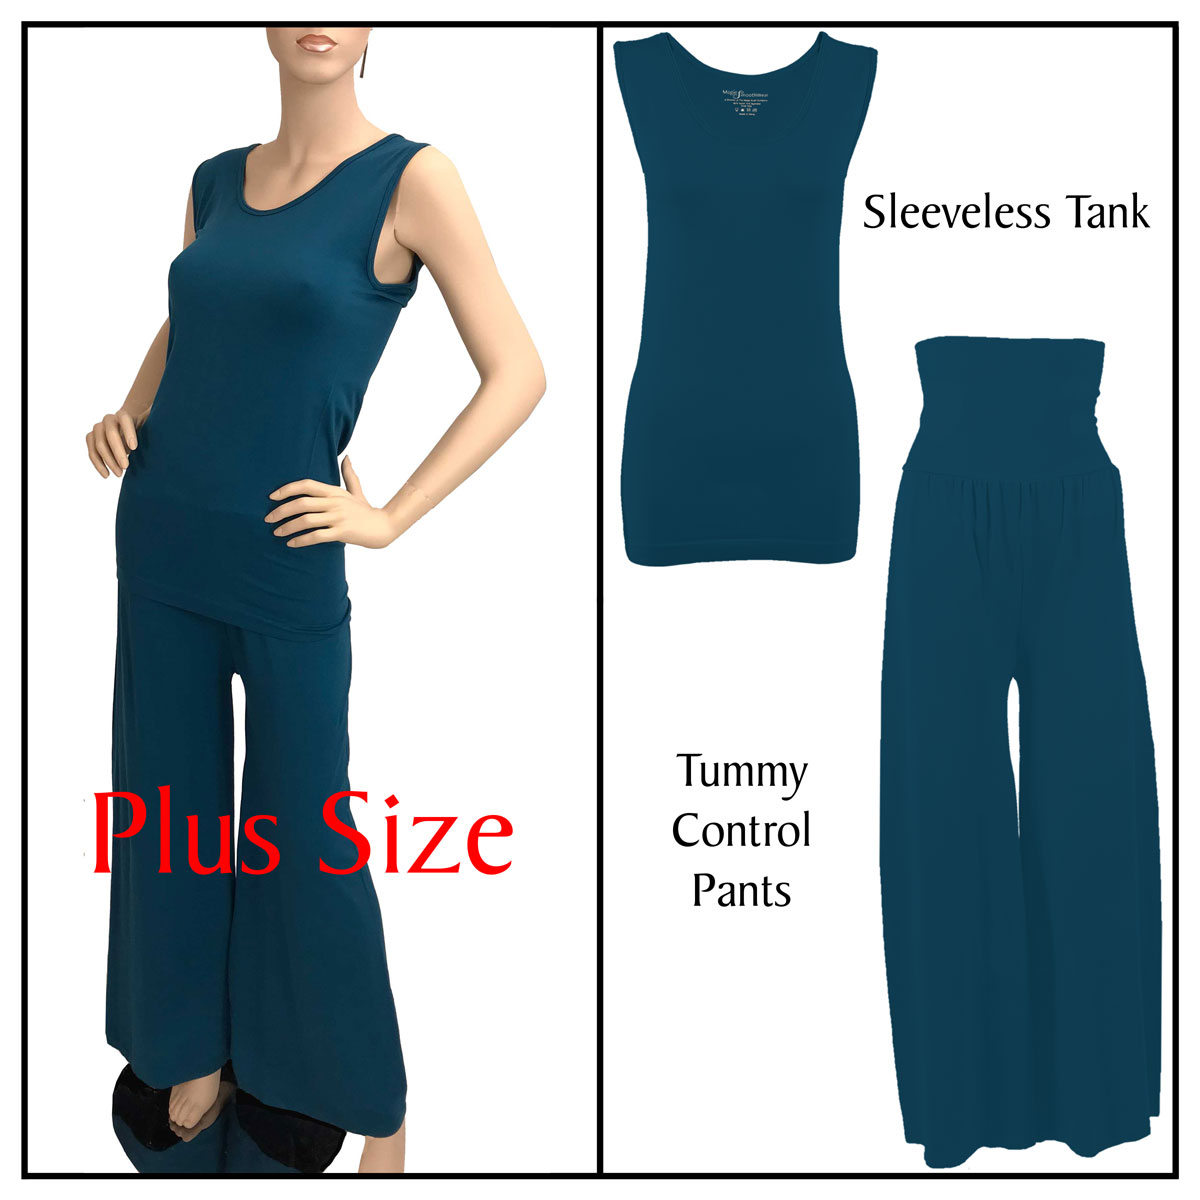 Dark Teal Sleeveless Top (Plus Size) with Pants